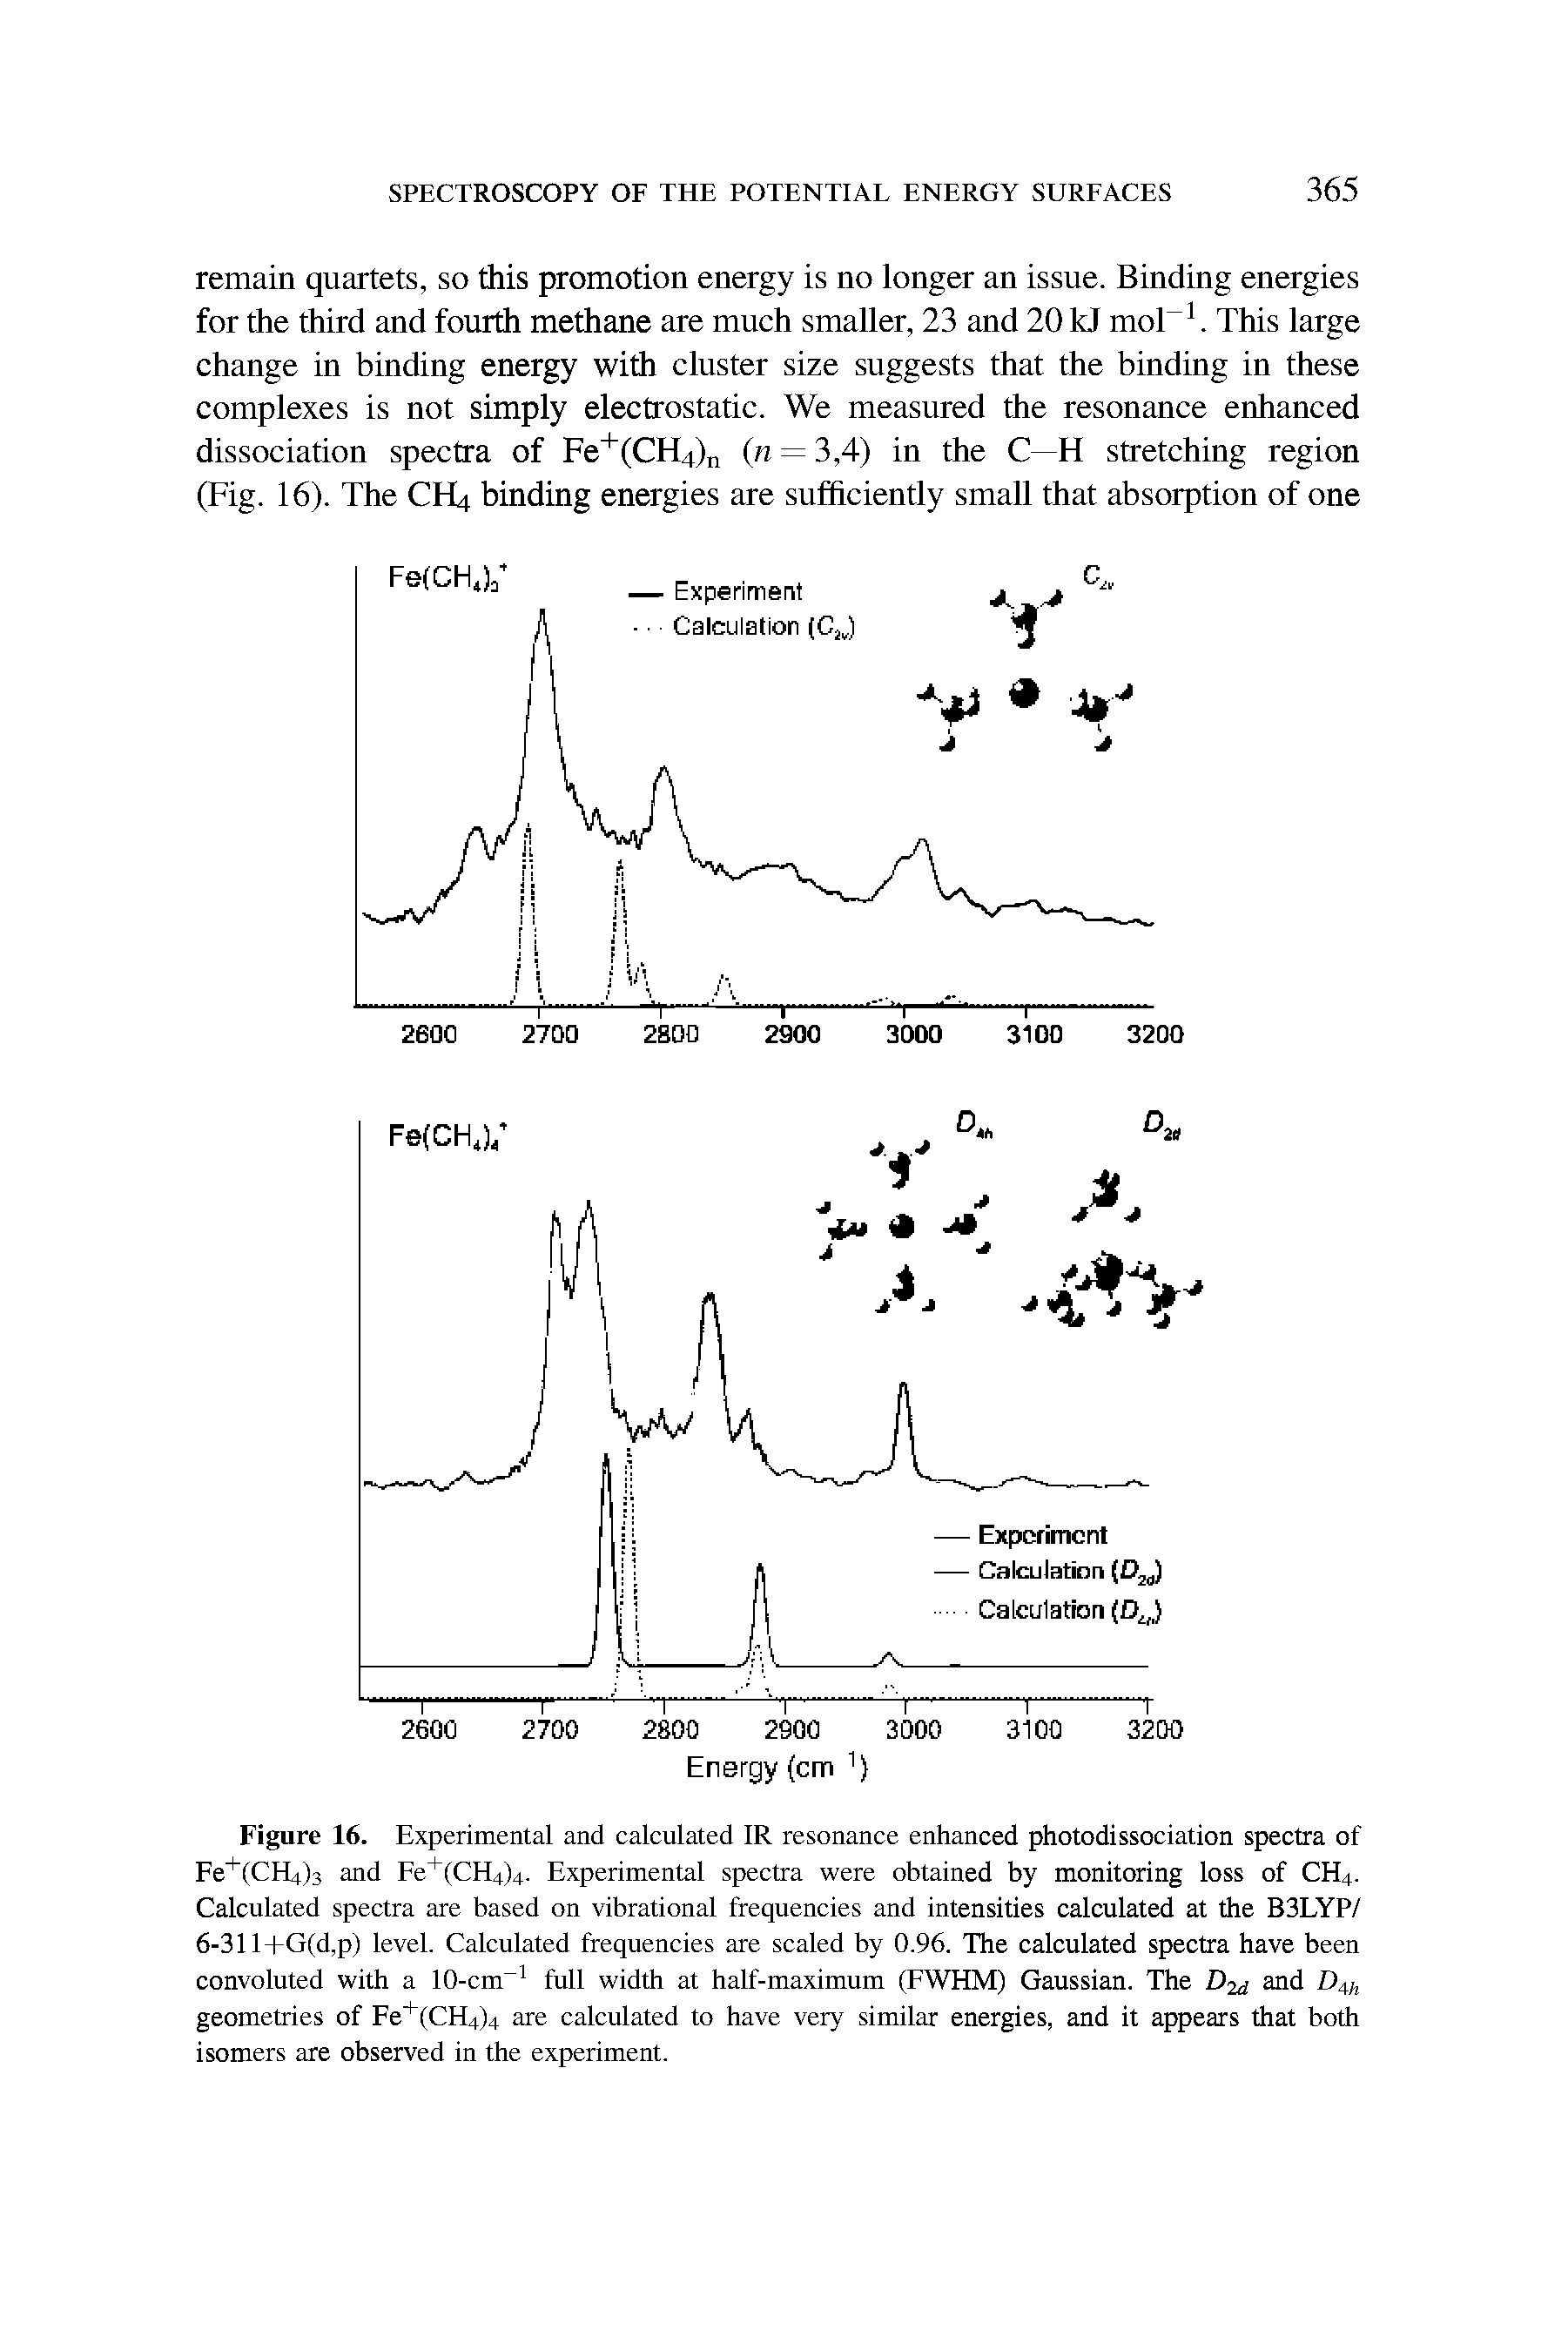 Figure 16. Experimental and calculated IR resonance enhanced photodissociation spectra of Fe" (CH4)3 and Fe" (CH4)4. Experimental spectra were obtained by monitoring loss of CH4. Calculated spectra are based on vibrational frequencies and intensities calculated at the B3LYP/ 6-311+G(d,p) level. Calculated frequencies are scaled by 0.96. The calculated spectra have been convoluted with a 10-cm full width at half-maximum (FWHM) Gaussian. The D2d geometries of Fe (CH4)4 are calculated to have very similar energies, and it appears that both isomers are observed in the experiment.